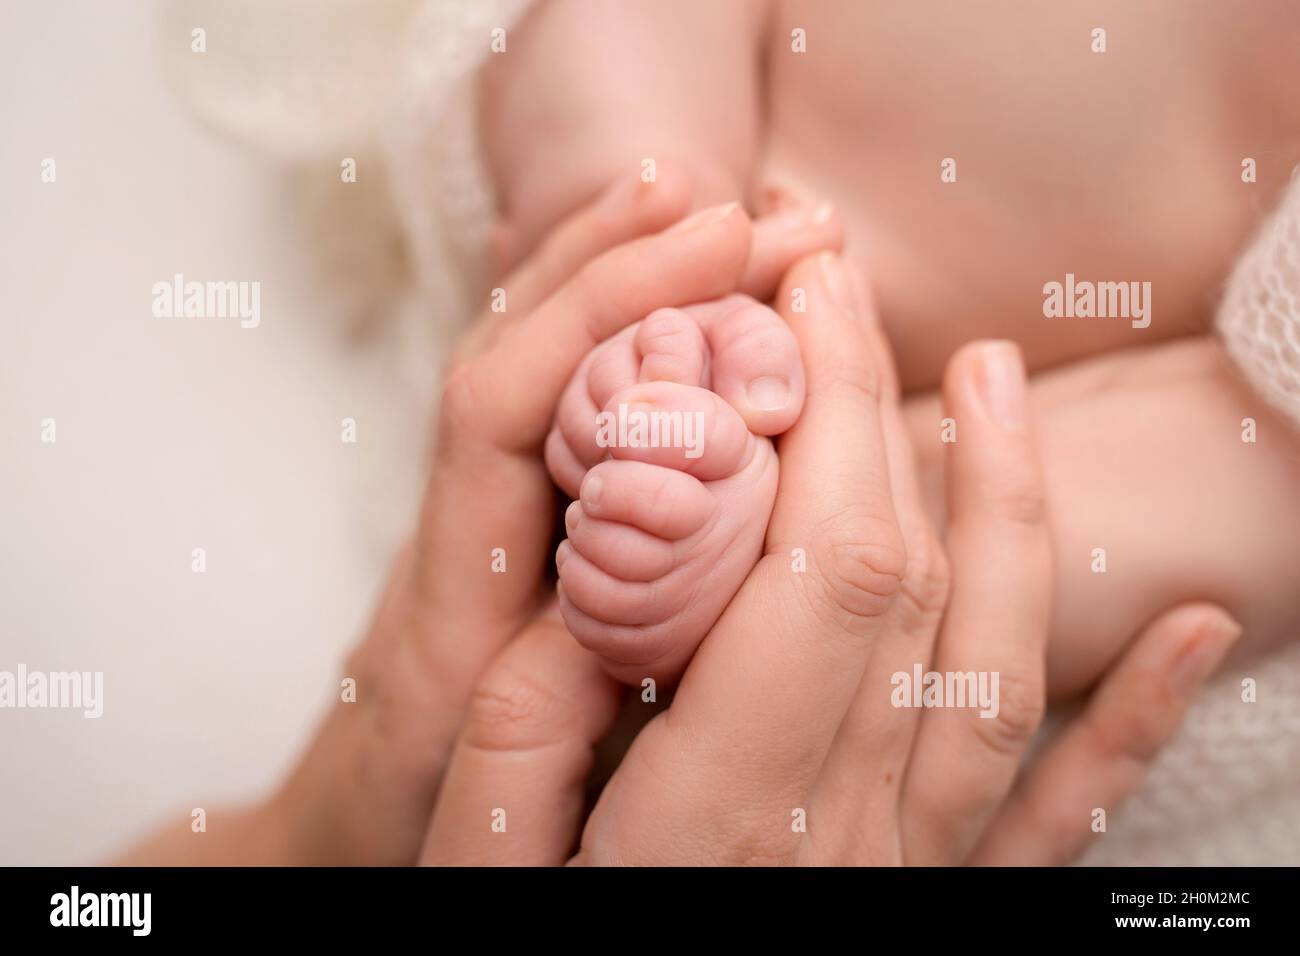 Loving mom hold baby's legs. Happy childhood. Parental care. Concept of a happy family. Stock Photo